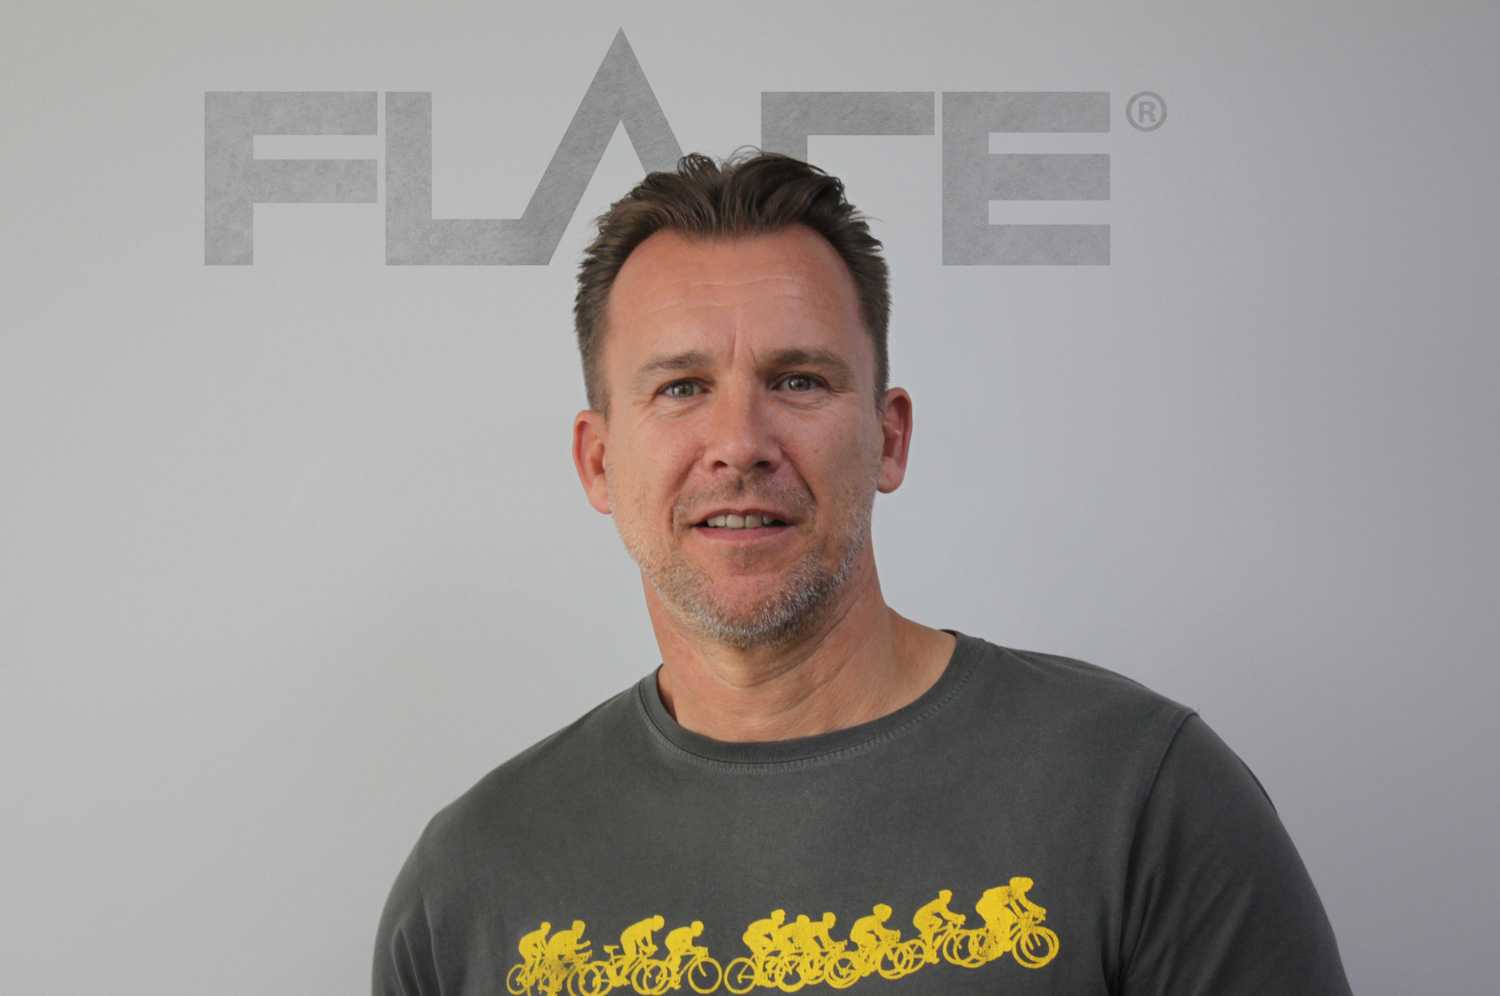 Prior to joining Flare, Simon Mighall spent 20 years at the UK subsidiary of Bose Corporation